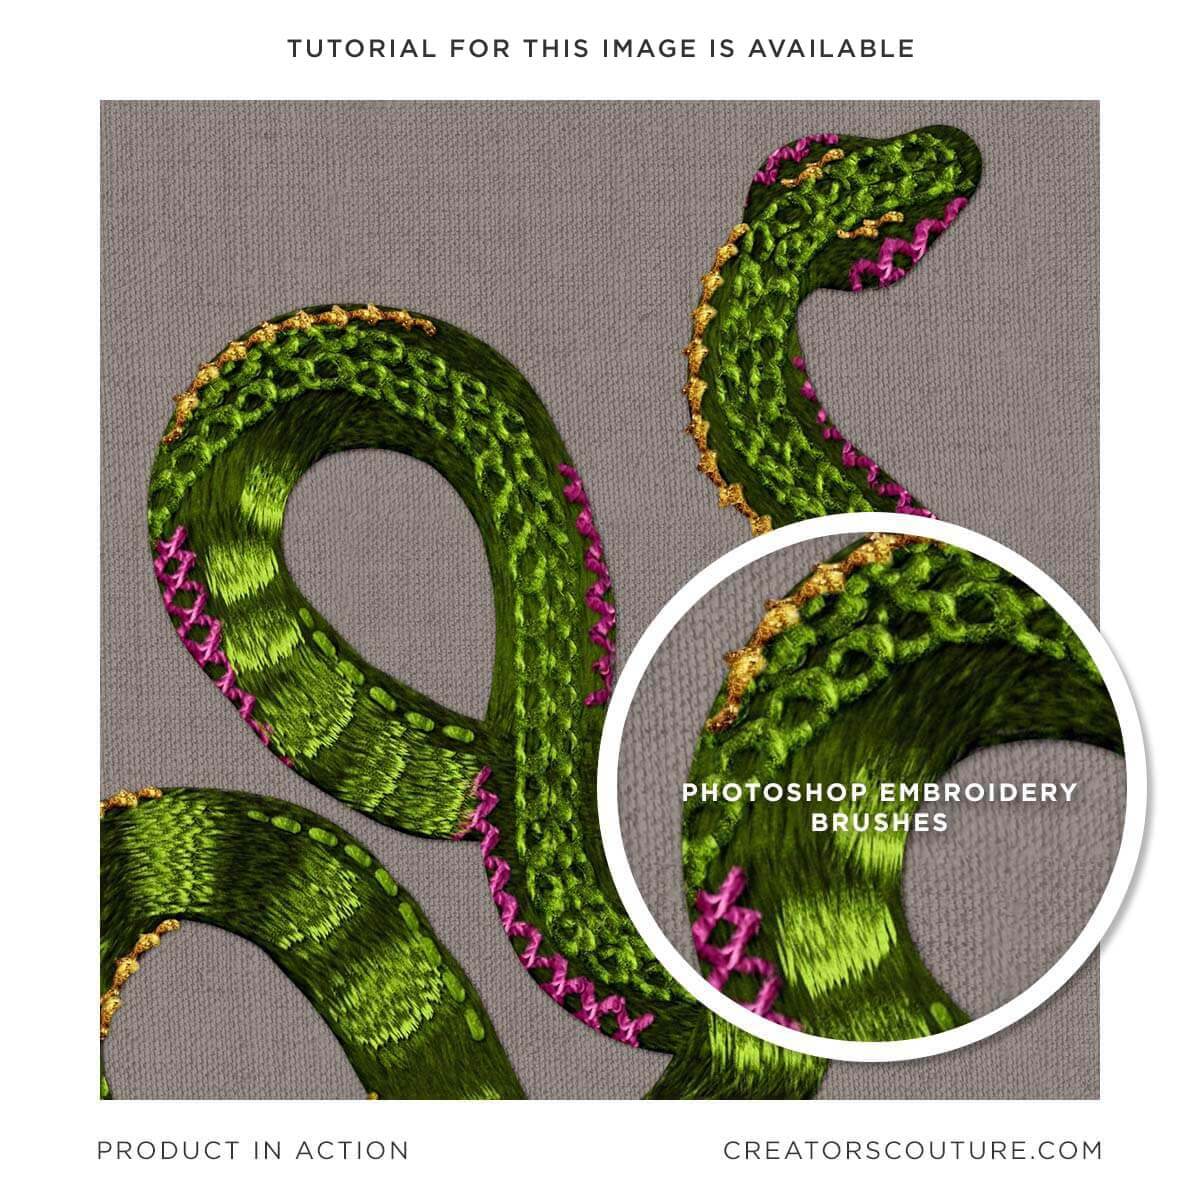 Embroidery style illustration of a snake, created in Adobe Photoshop, realistic embroidery effect